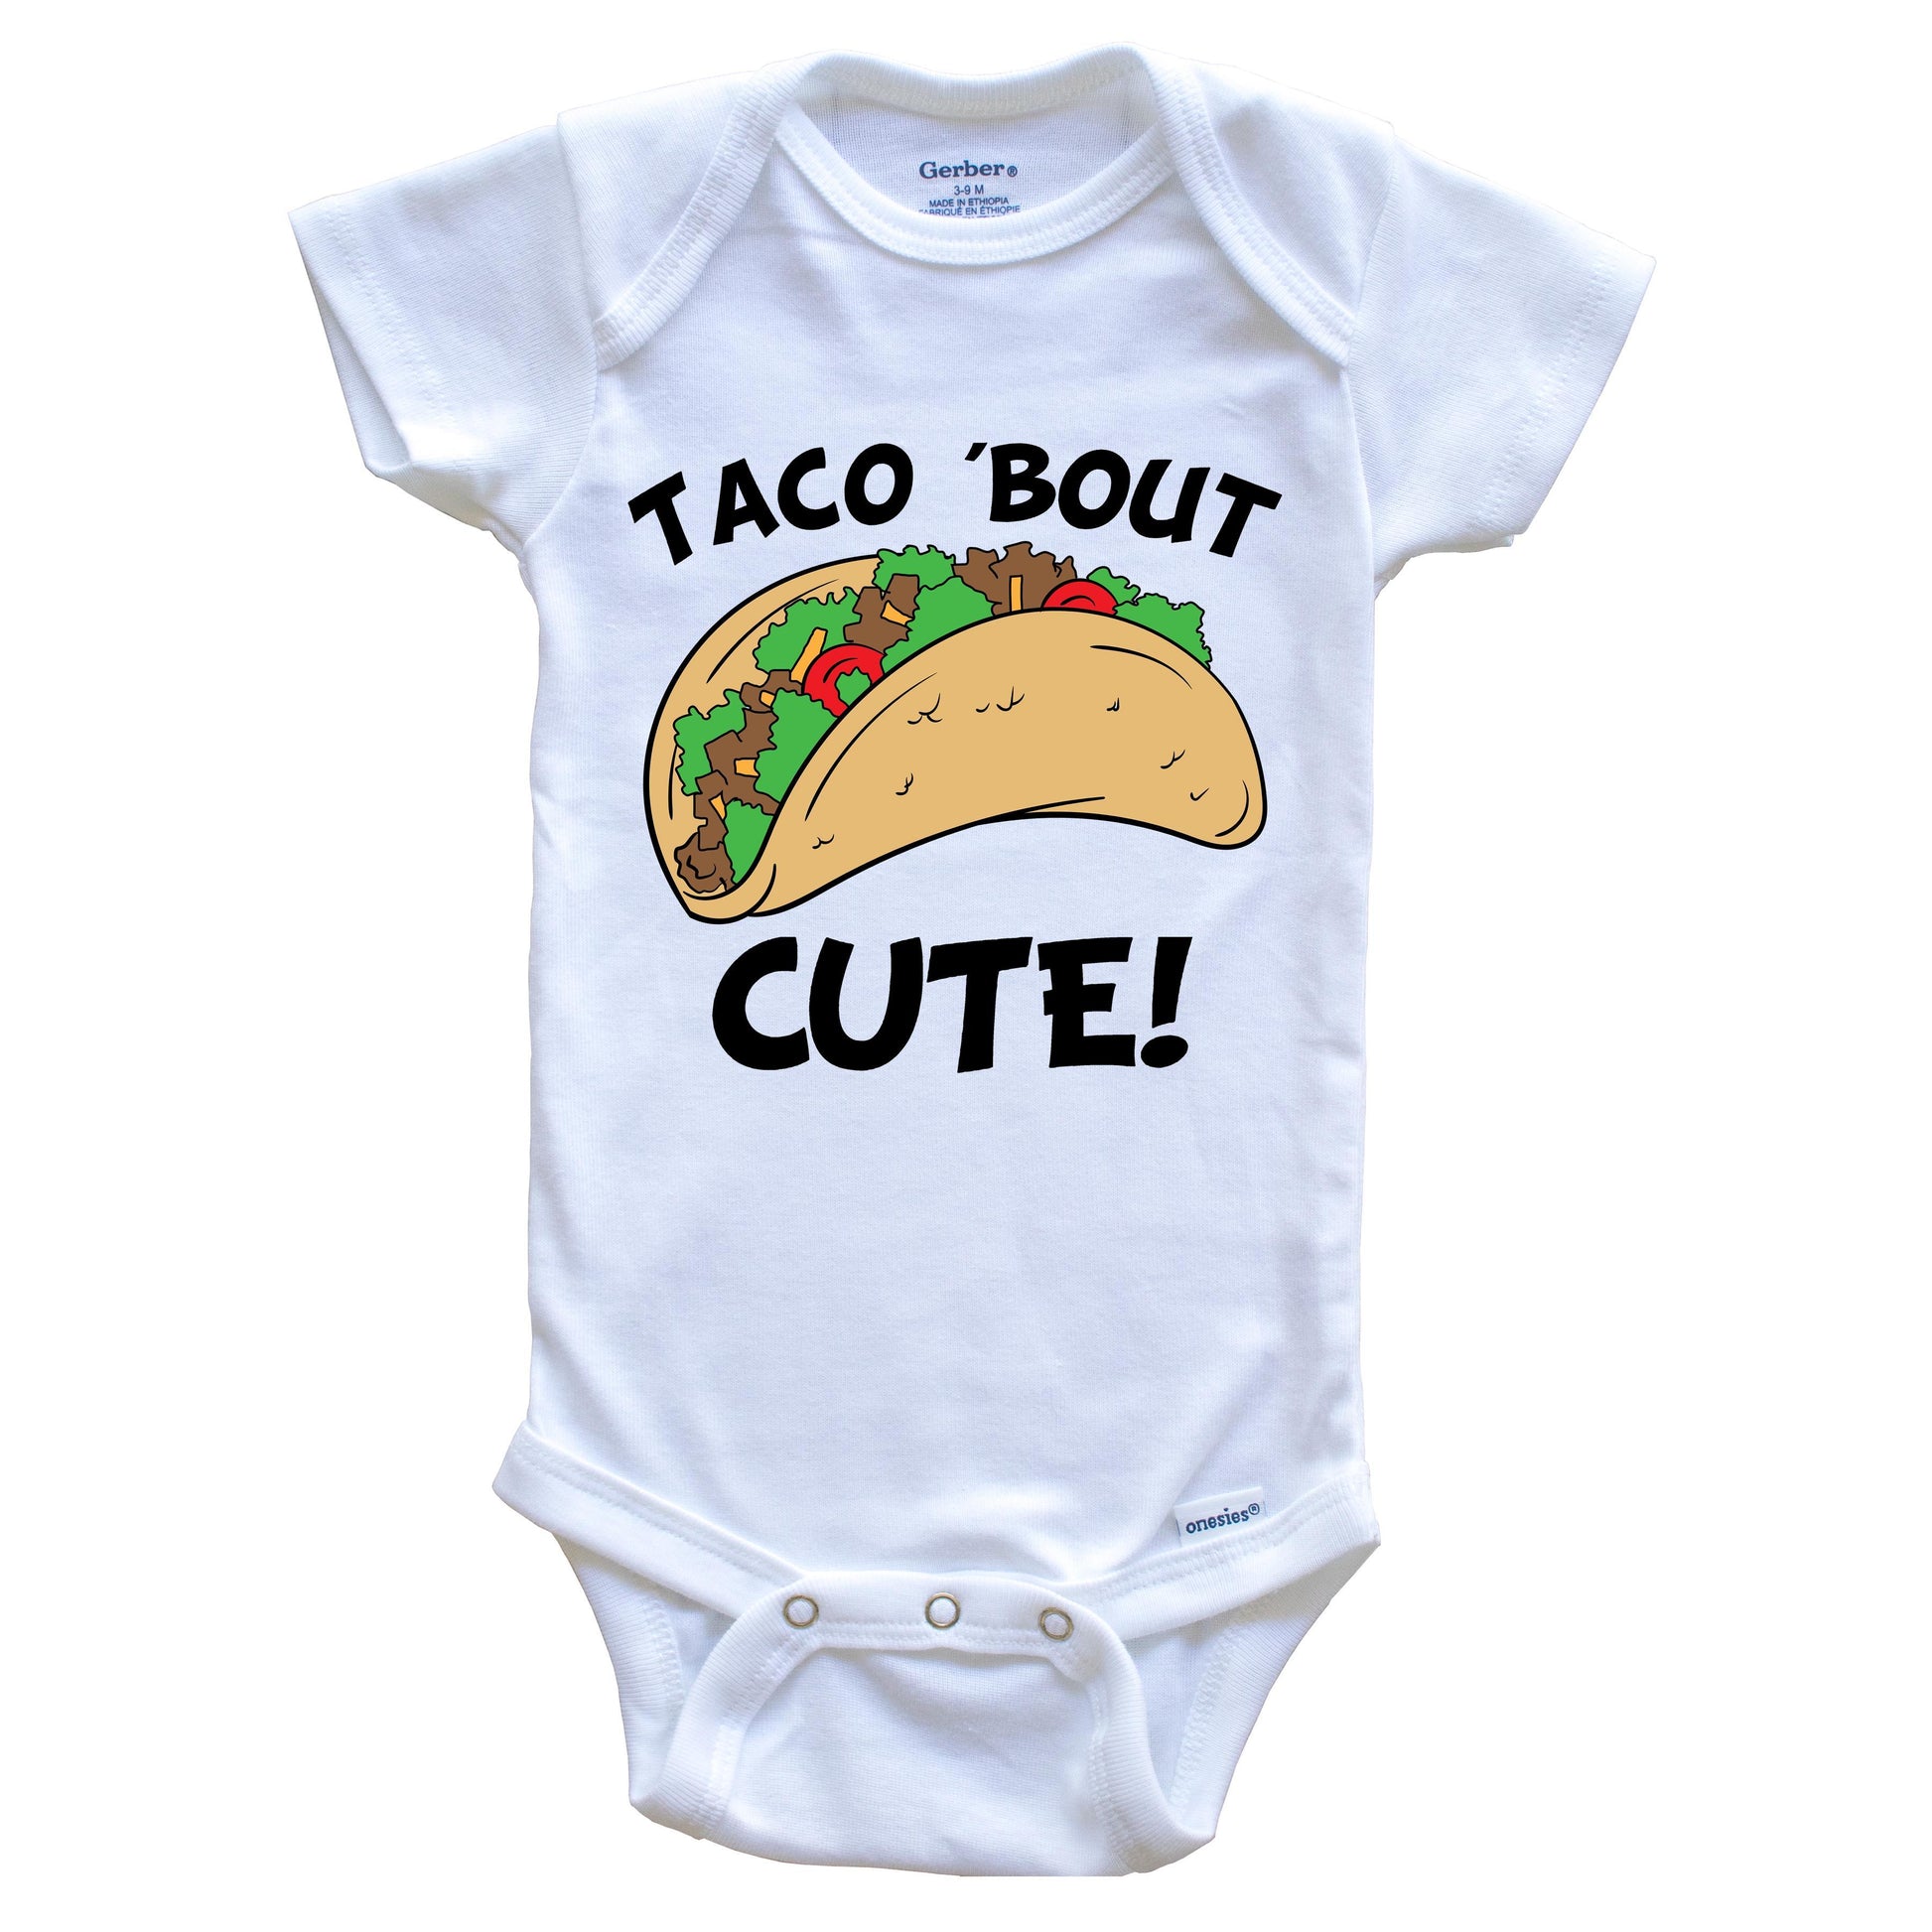 Taco 'Bout Cute Funny Taco Onesie - One Piece Baby Bodysuit